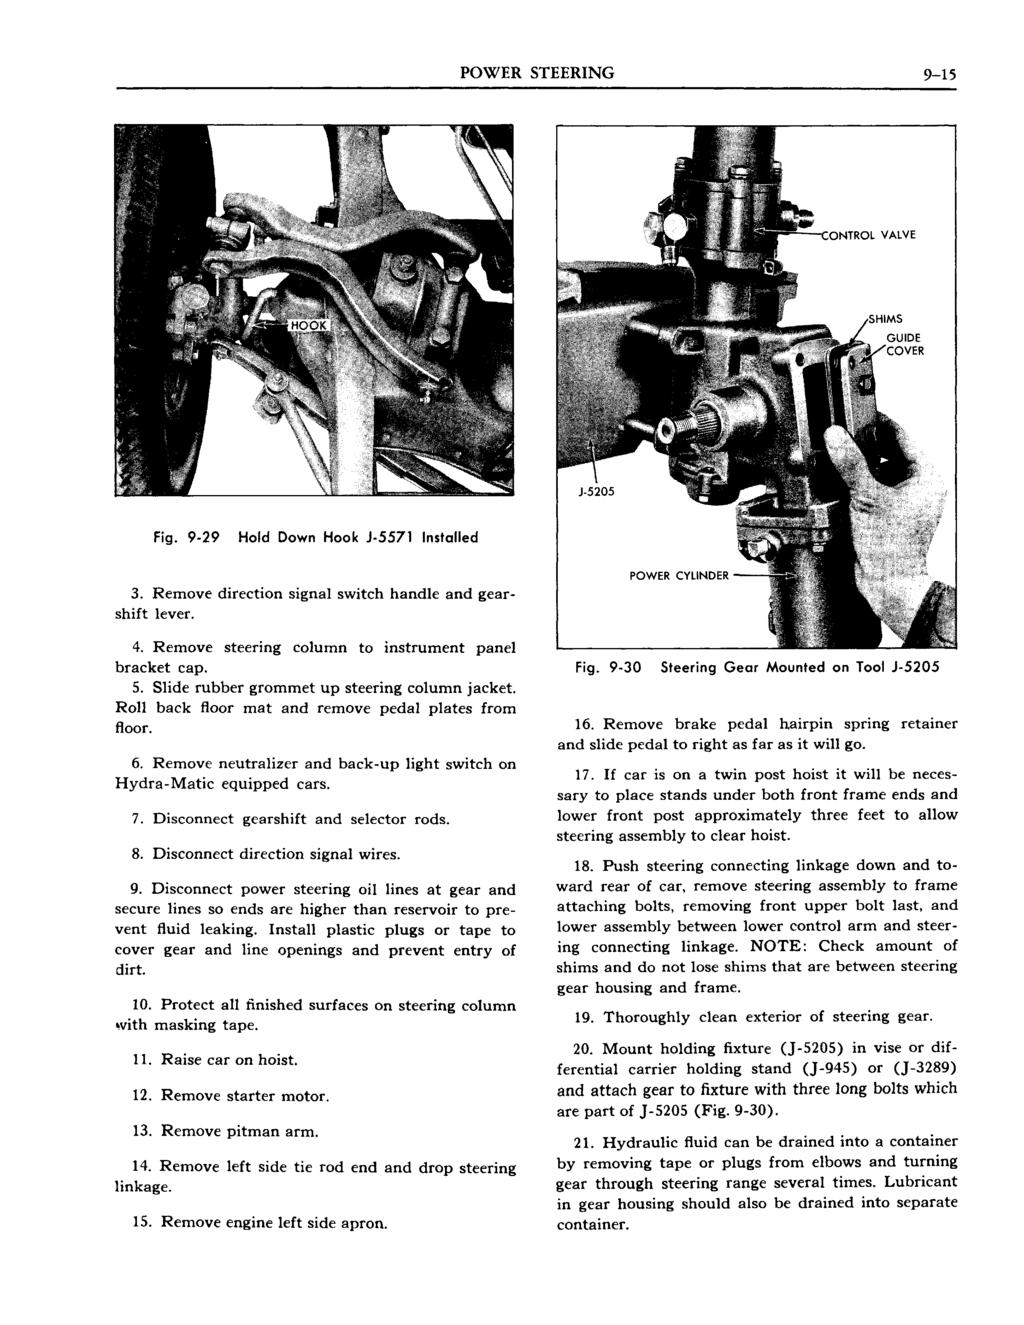 POWER STEERING 9-15 Fig. 9-29 Hold Down Hook J-5571 Installed 3. Remove direction signal switch handle and gearshift lever. 4. Remove steering column to instrument panel bracket cap. 5.